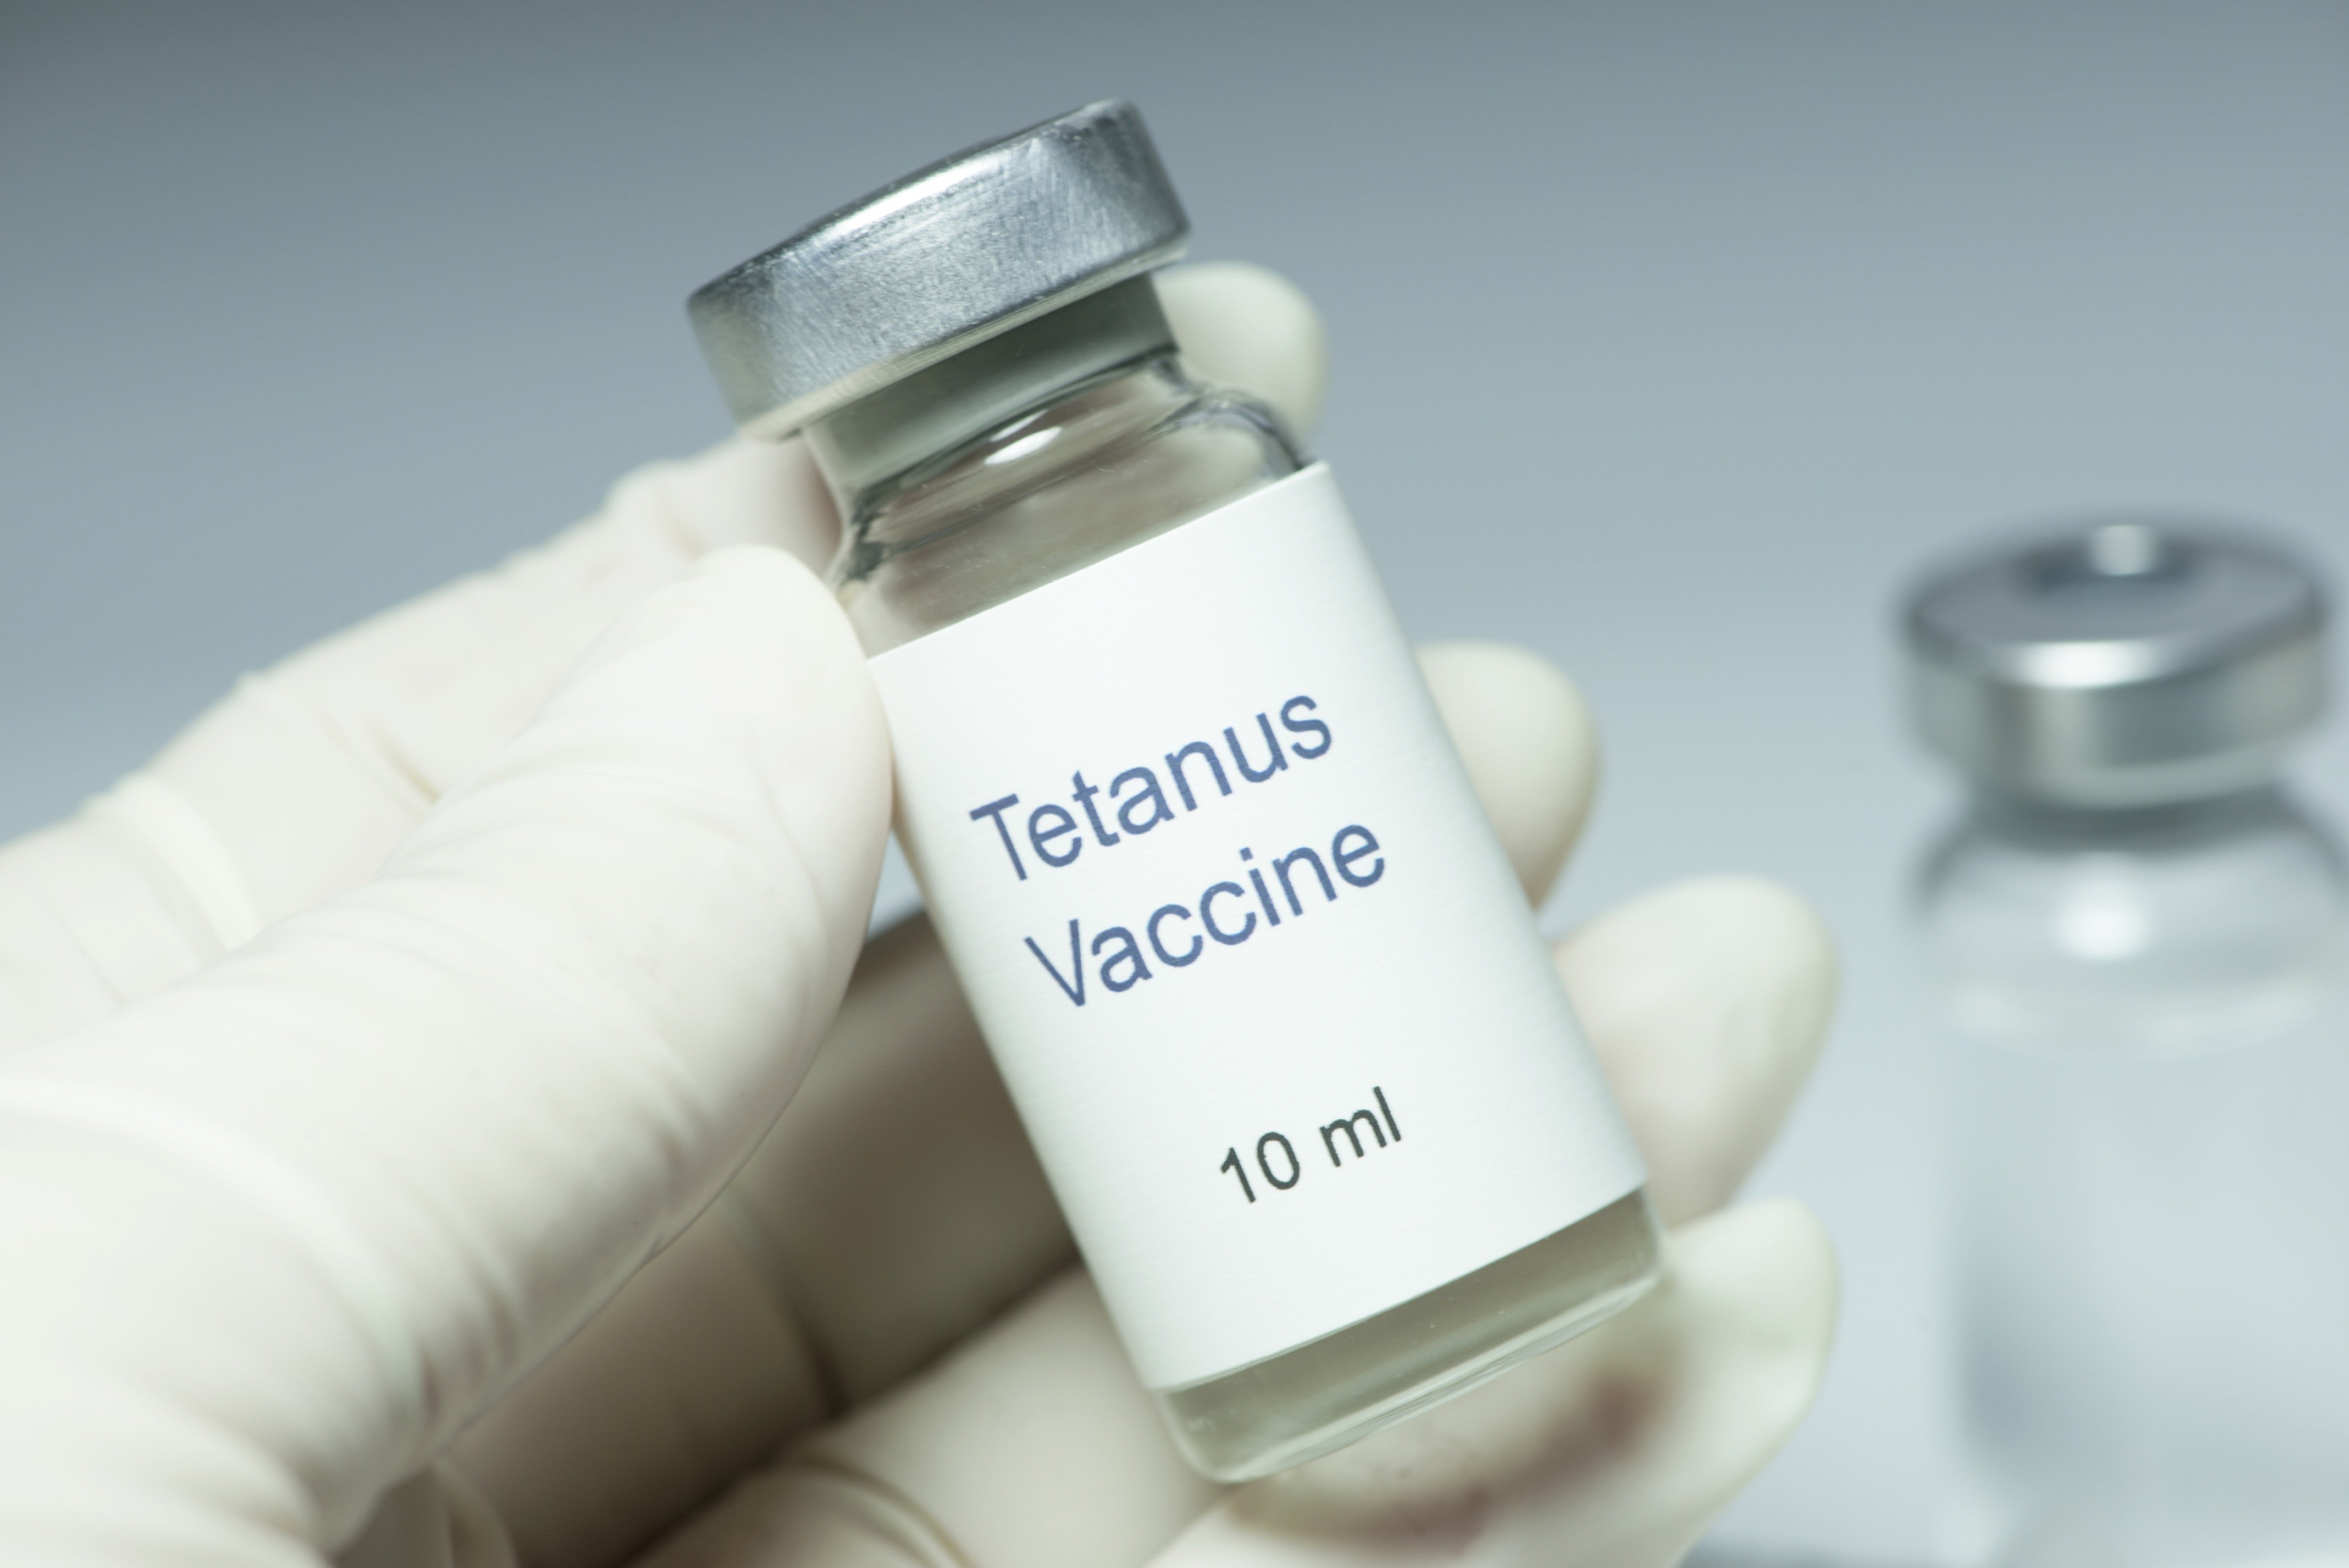 Tetanus shot: When should a person get one and where from?